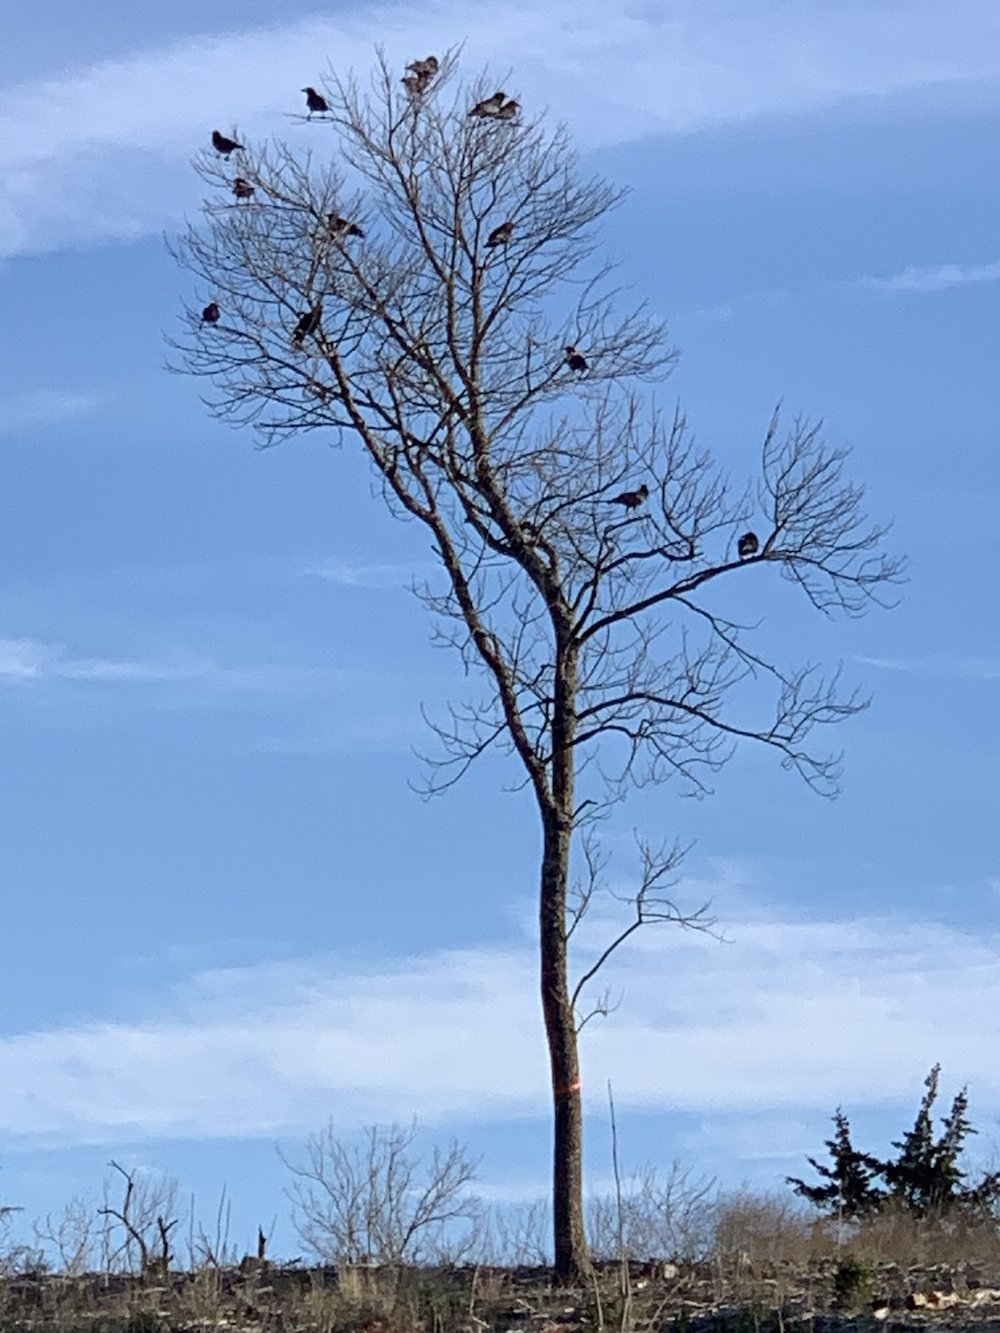  There were also close to 100 Crows gathering in the trees on Feb. 20. 